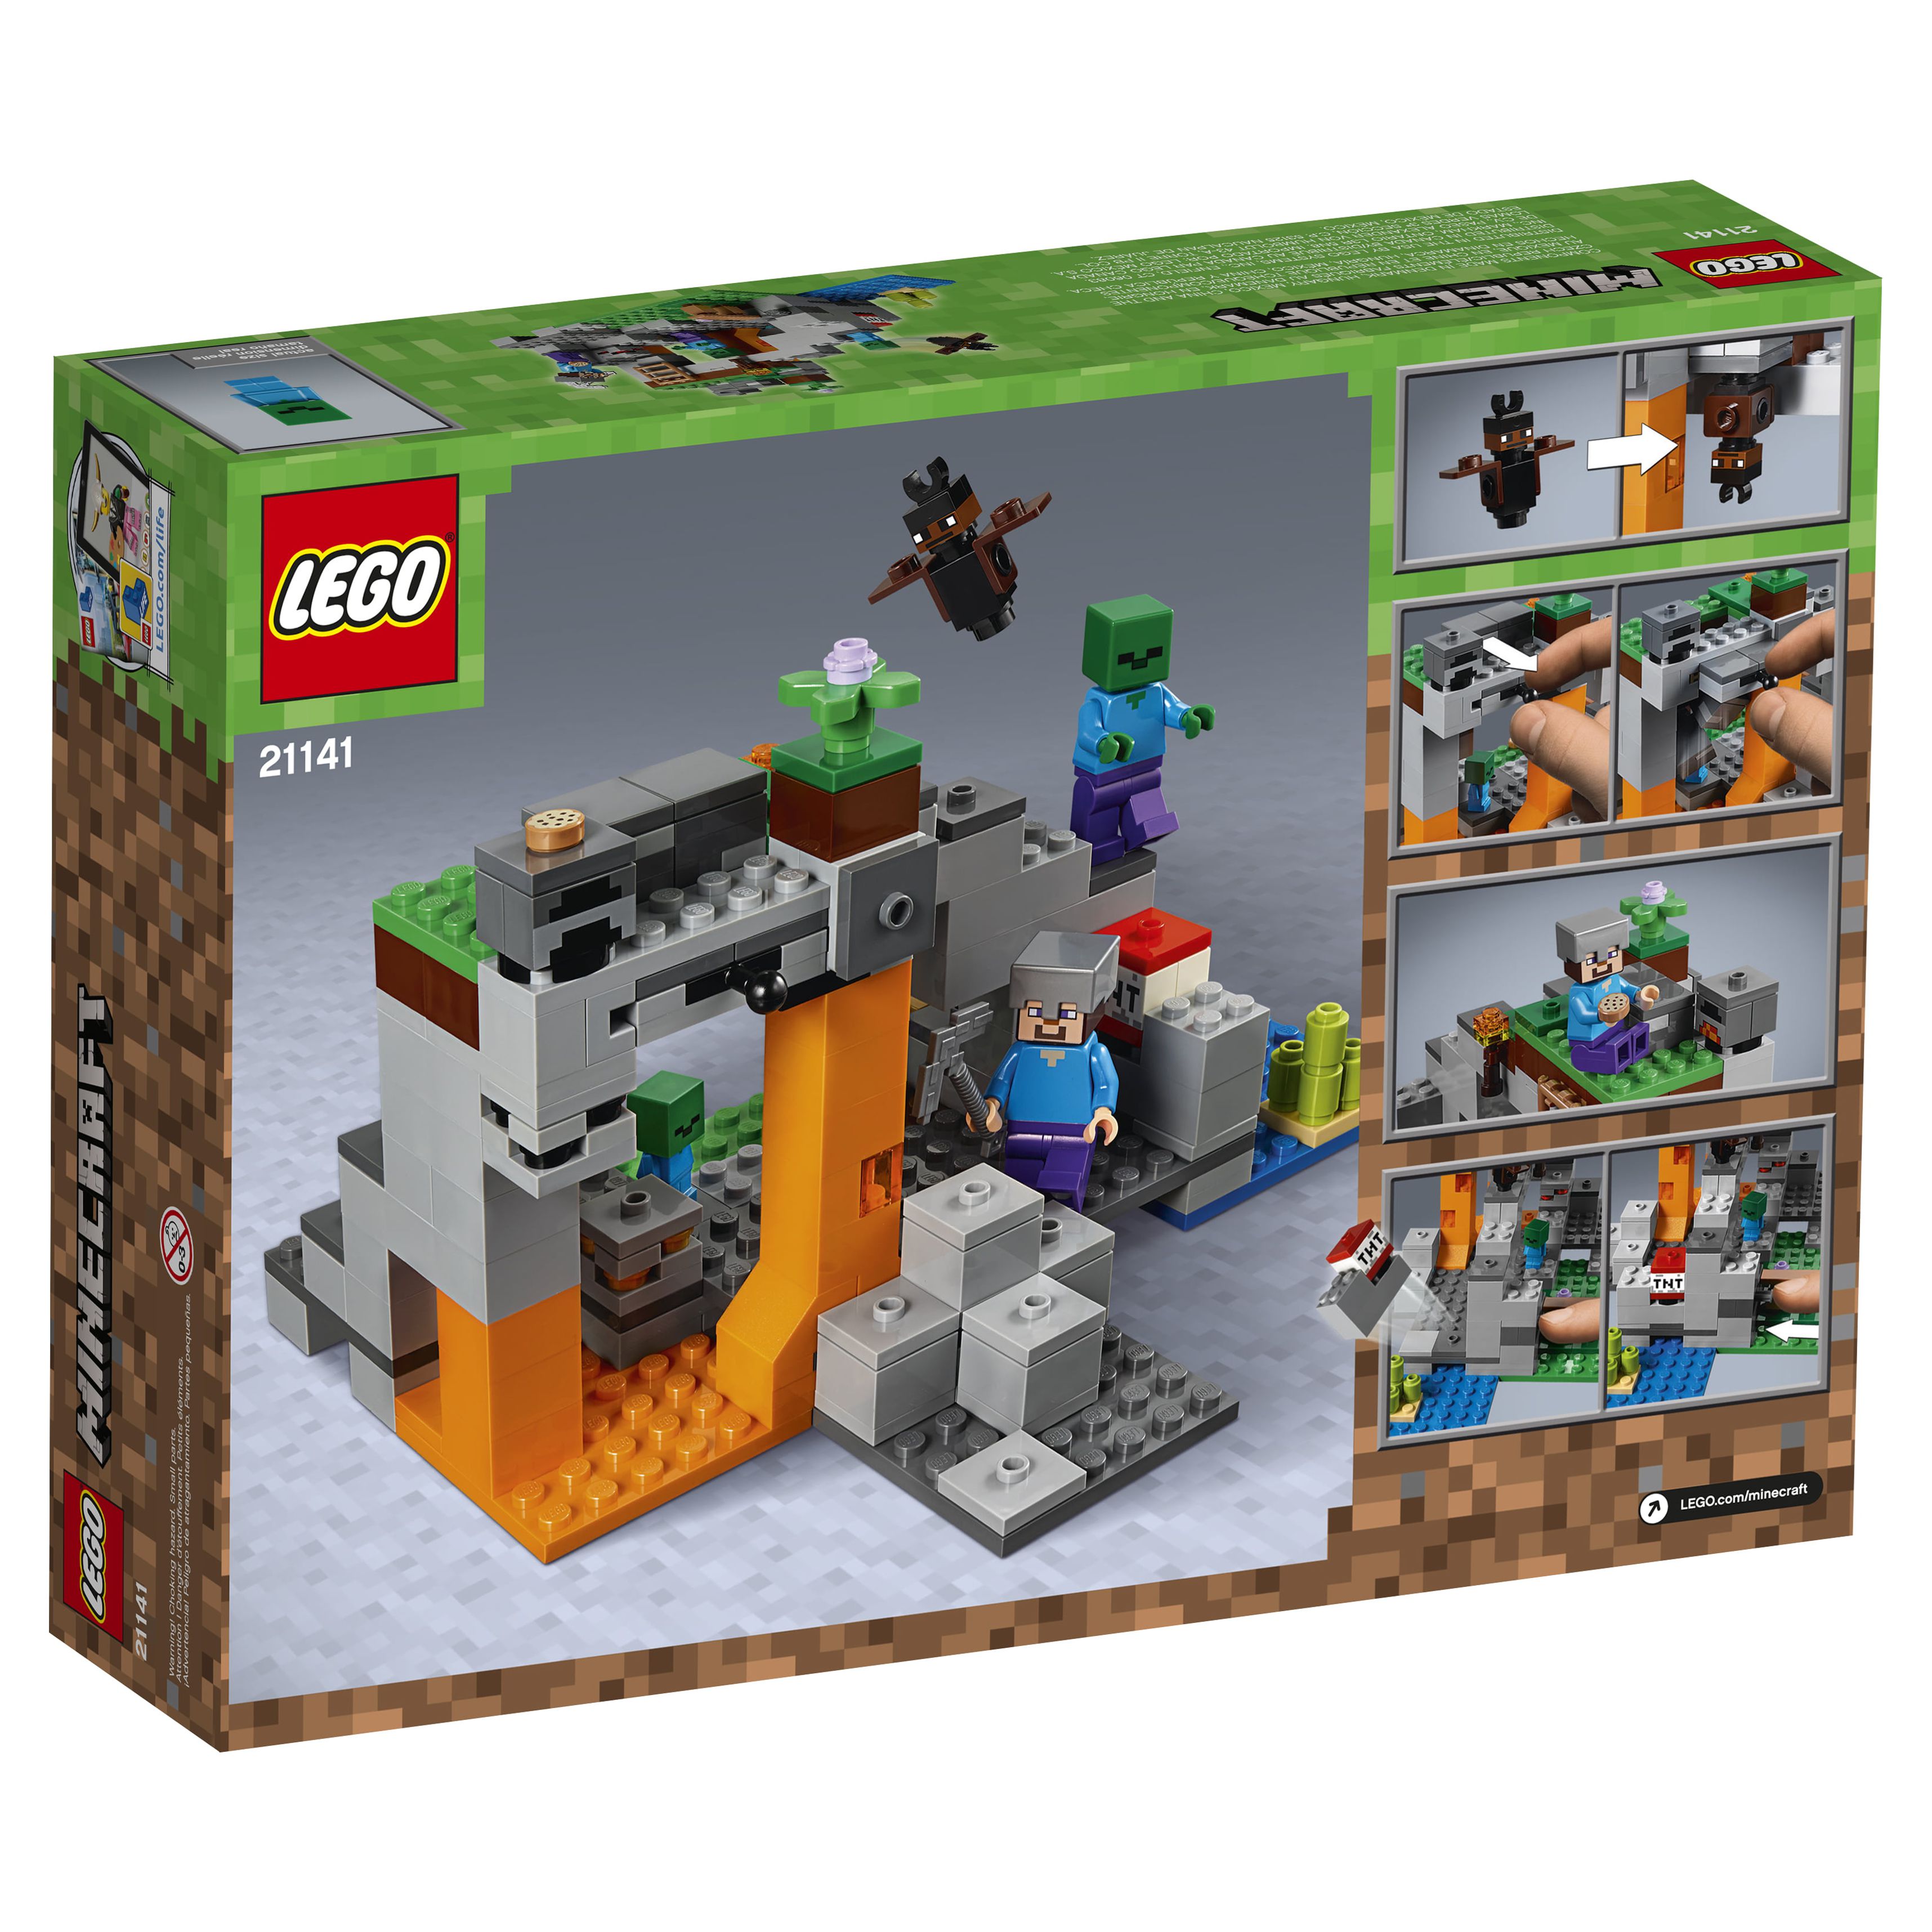 LEGO Minecraft The Zombie Cave 21141 Building Kit for Creative Play - image 5 of 7